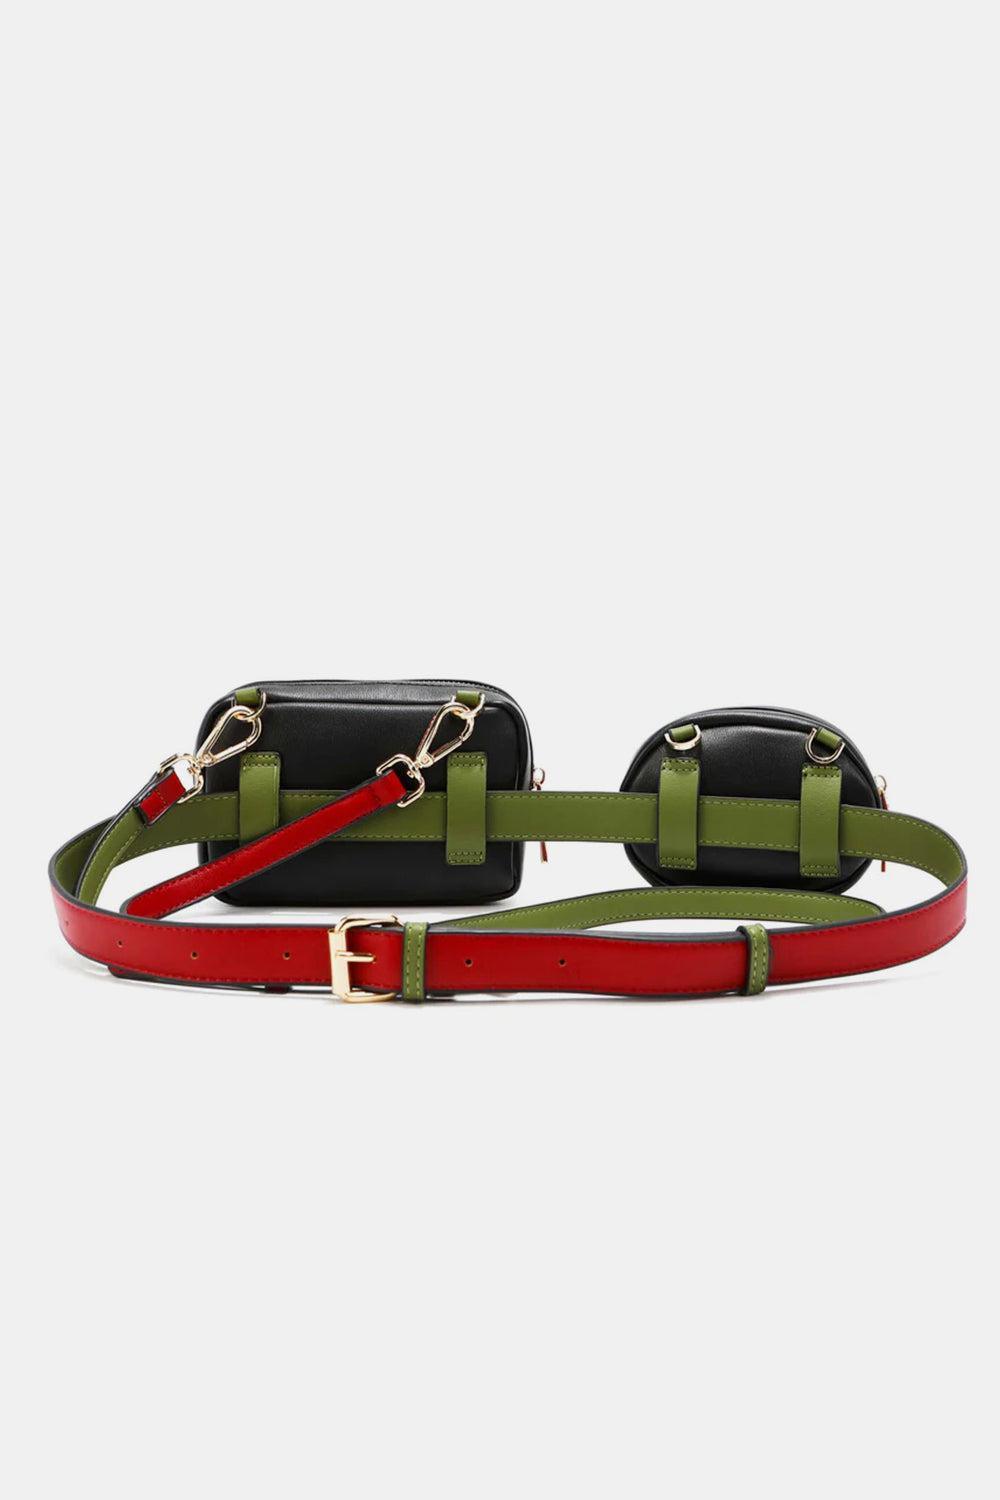 a black, green and red belted bag on a white background